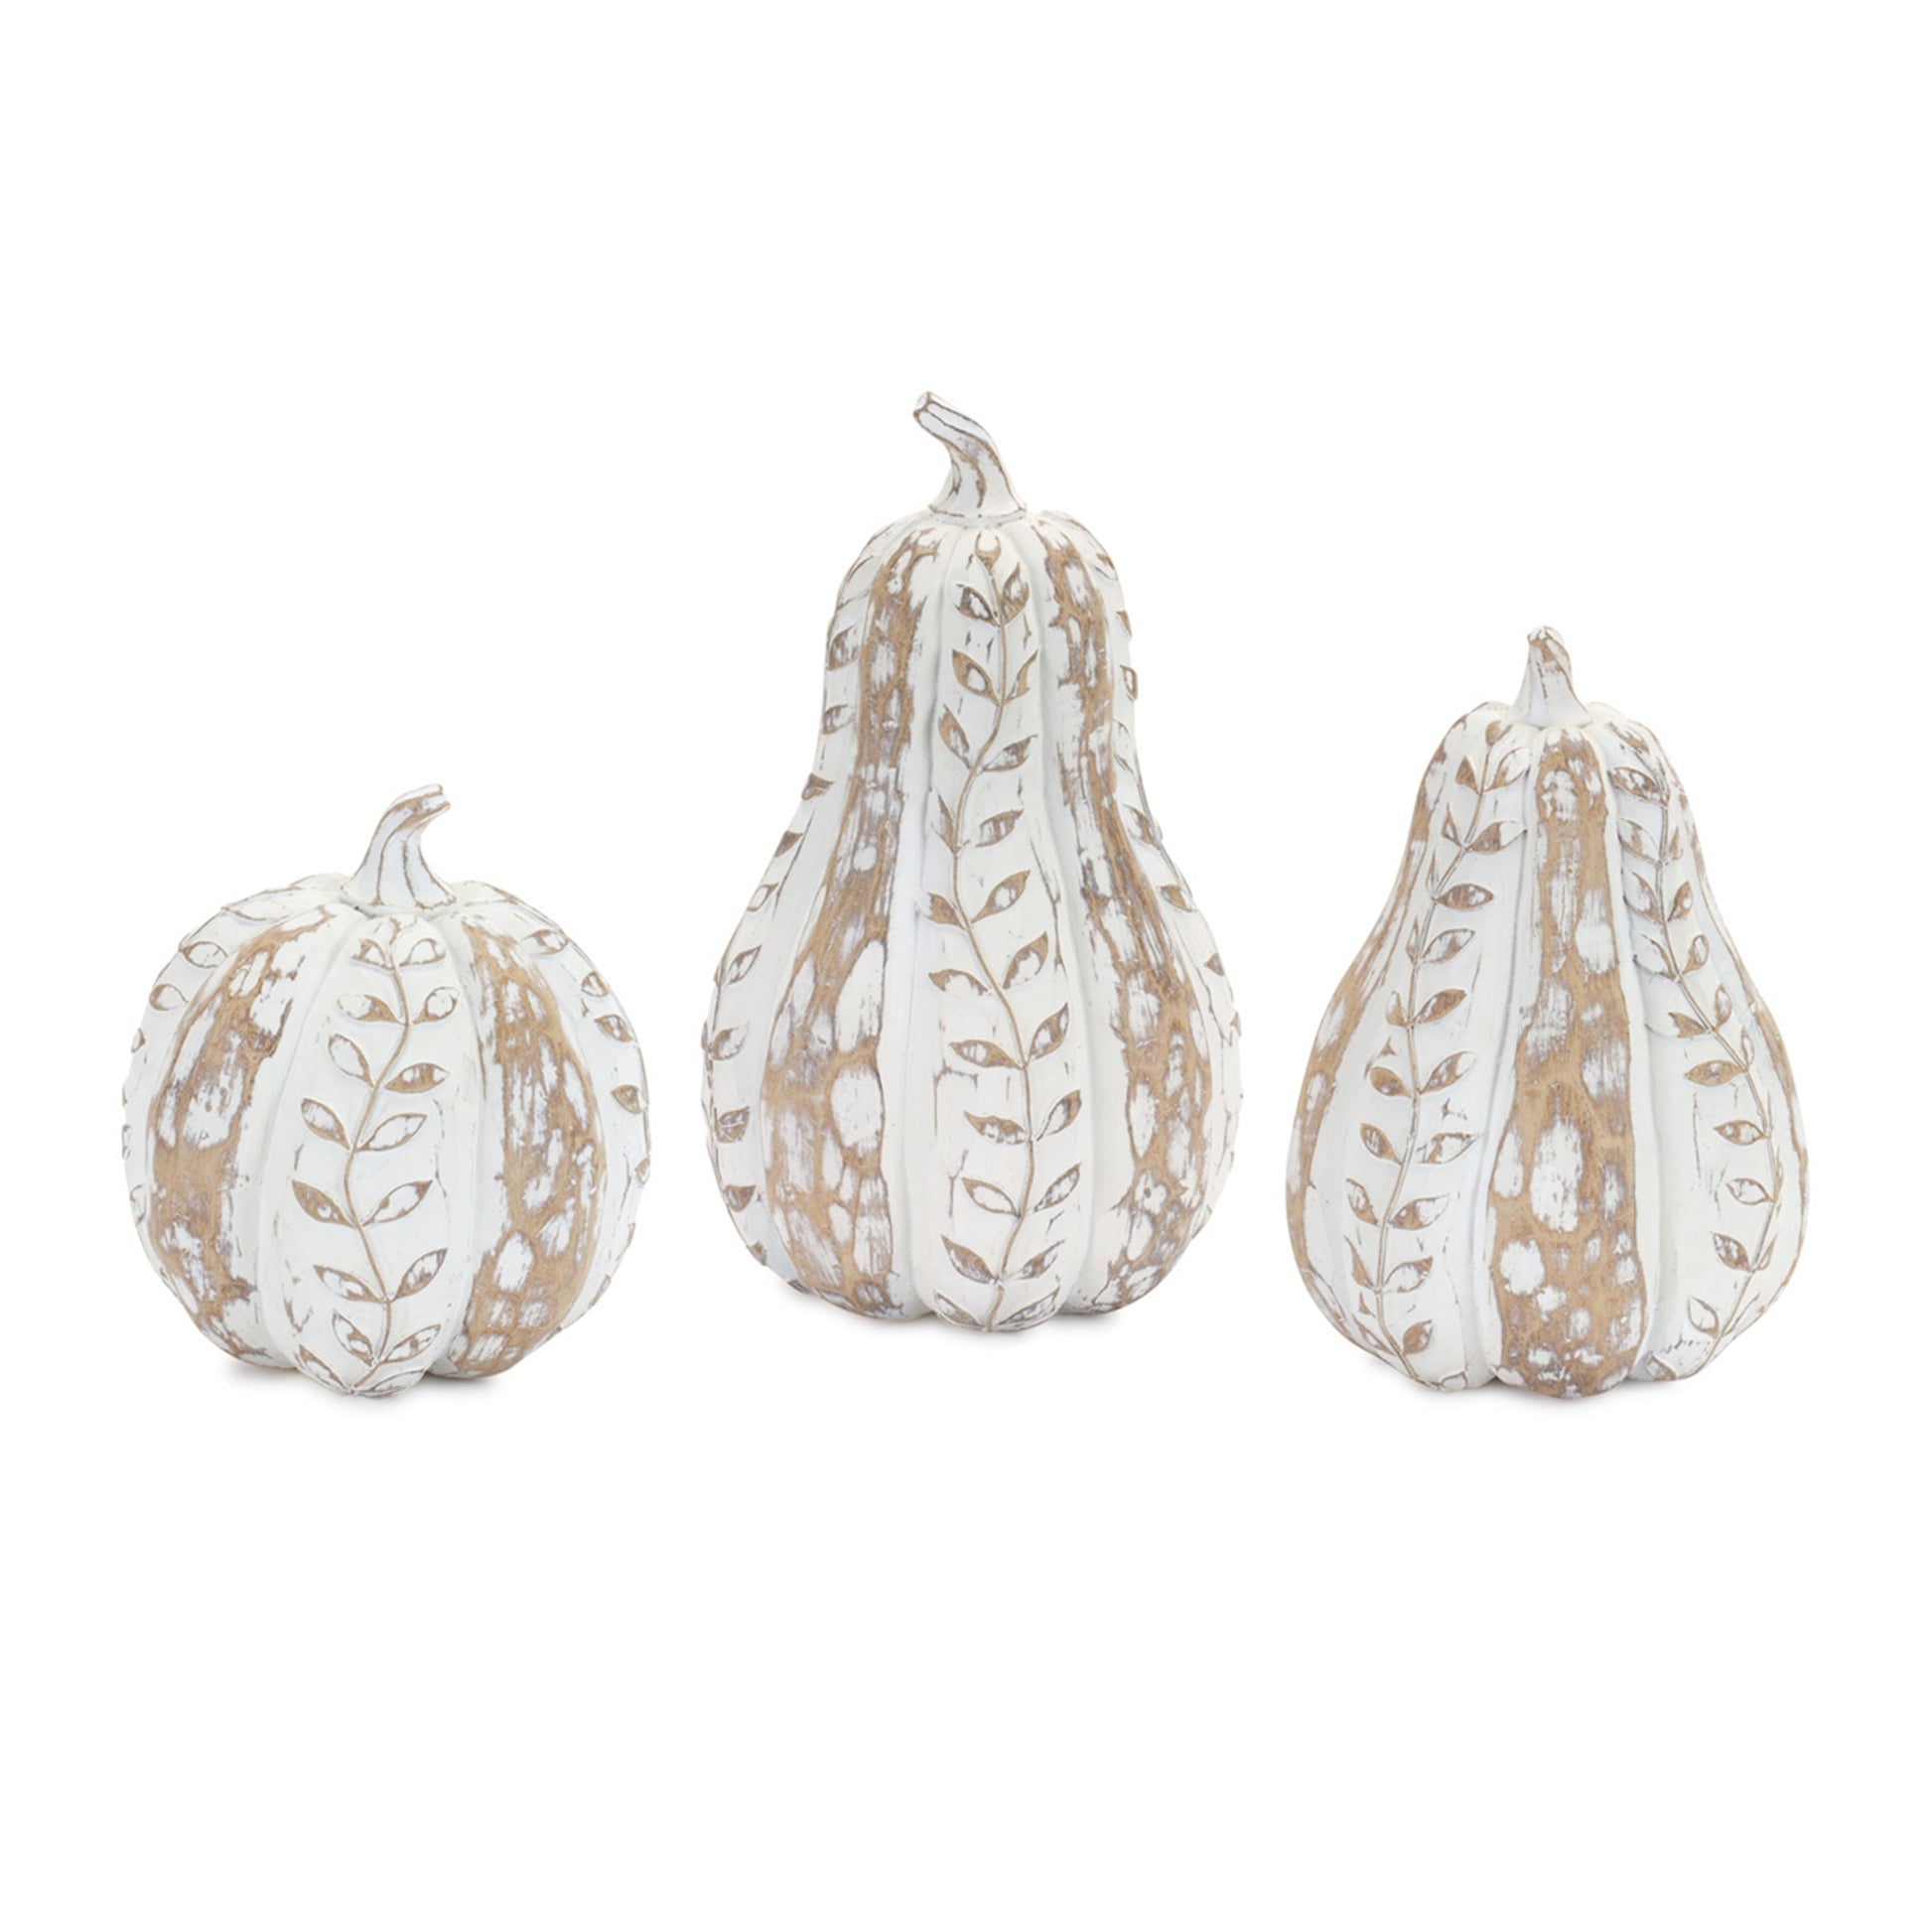 Whitewashed wood design fall pumpkin with leaf pattern, The white-washed finish paired with the ornamental leaf pattern is the perfect combination to create a stunning fall display. The quality polyresin composition is sure to last for seasons to come.